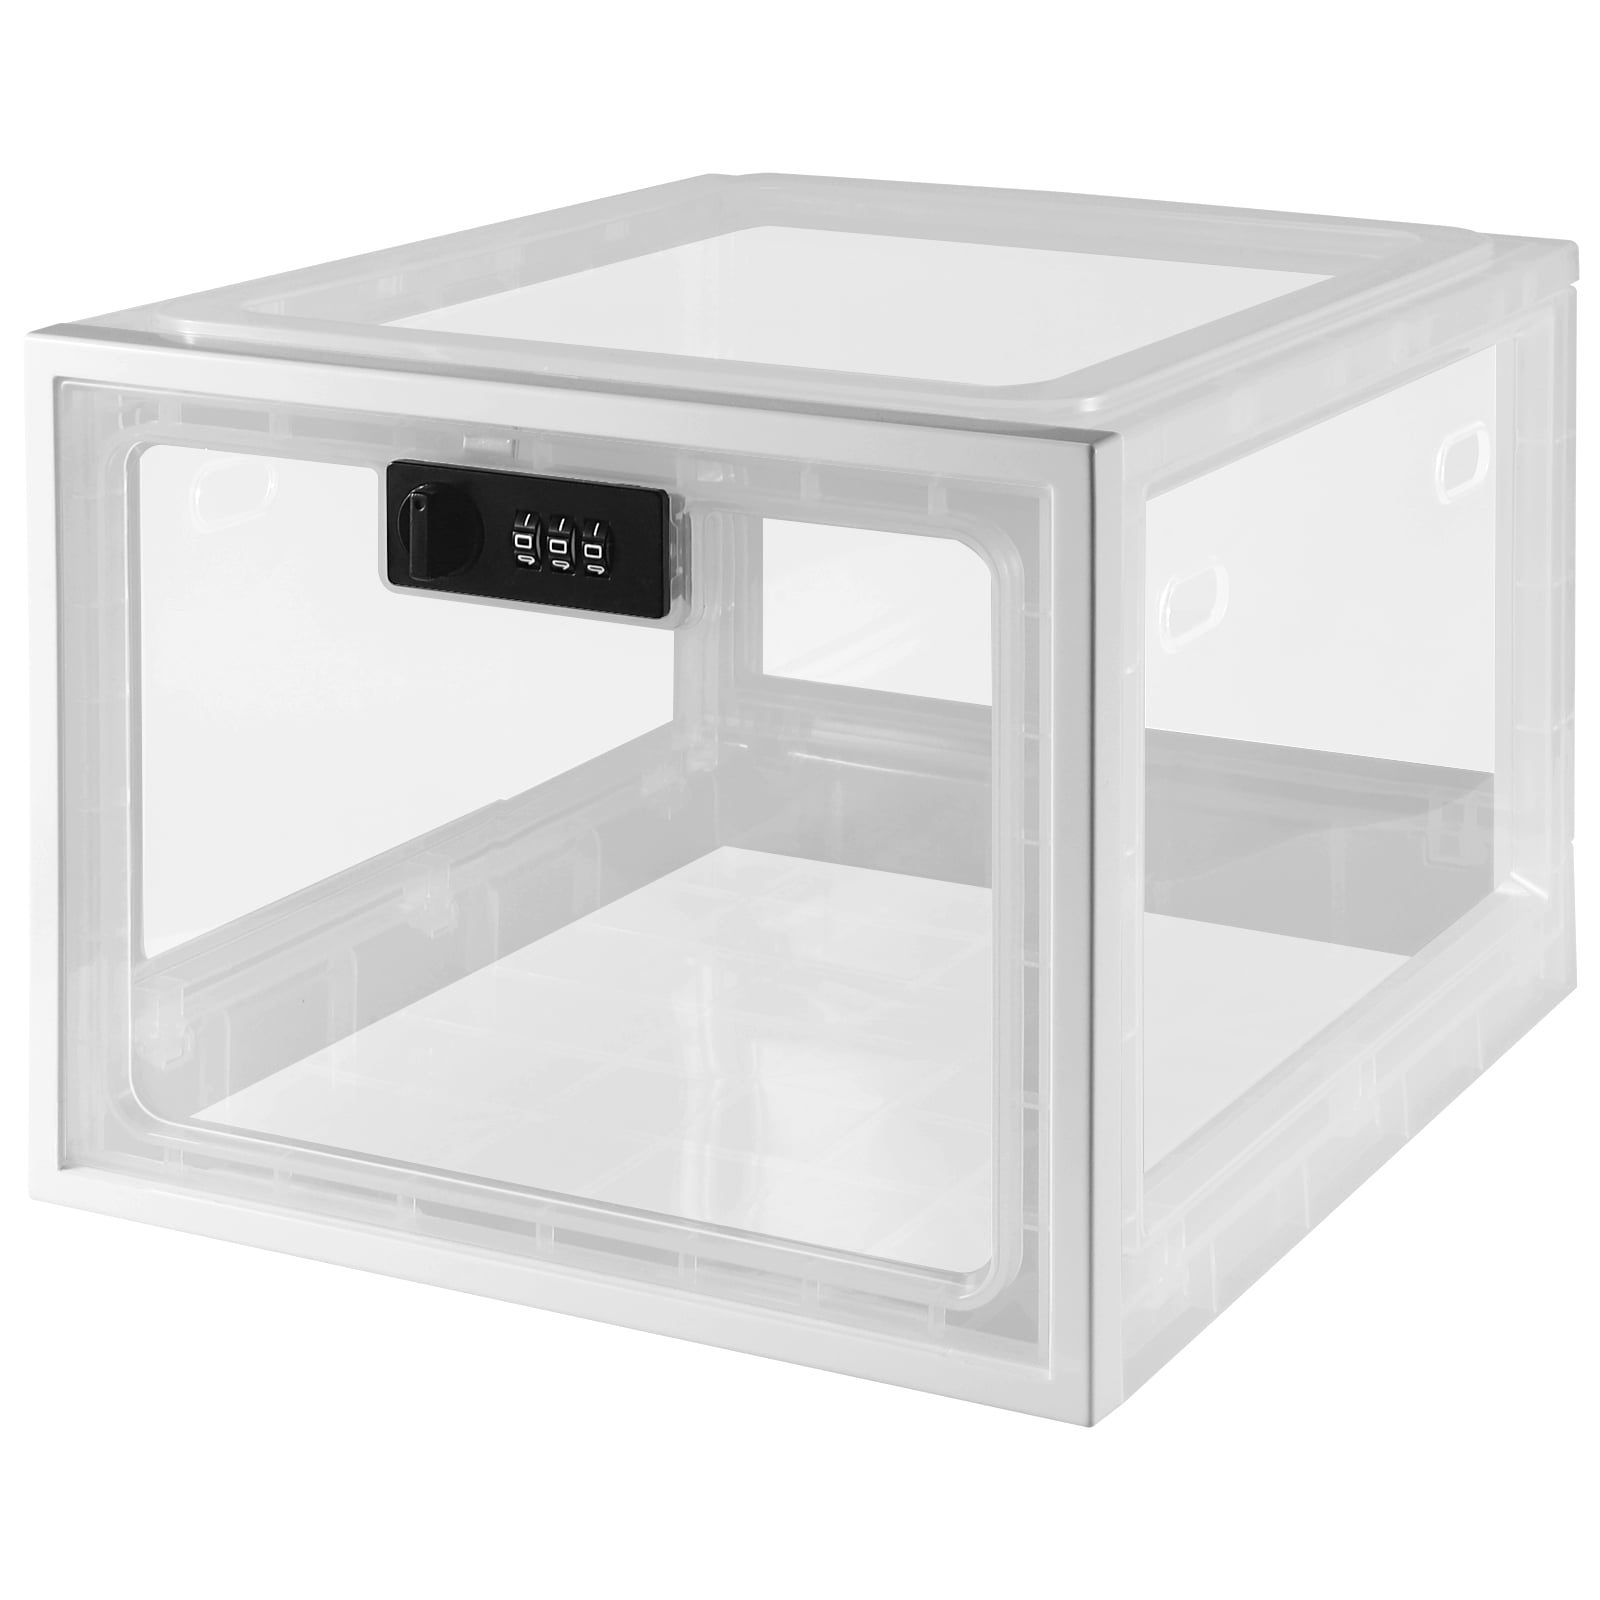 JLLOM Medicine Lock Box, Large Capacity Refrigerator Lock Box, Clear  Lockable Box for Food, Charging Lock Box for Electronic Devices,  Office,School,Home, 12 x 8 x 6.6 inches Externally 